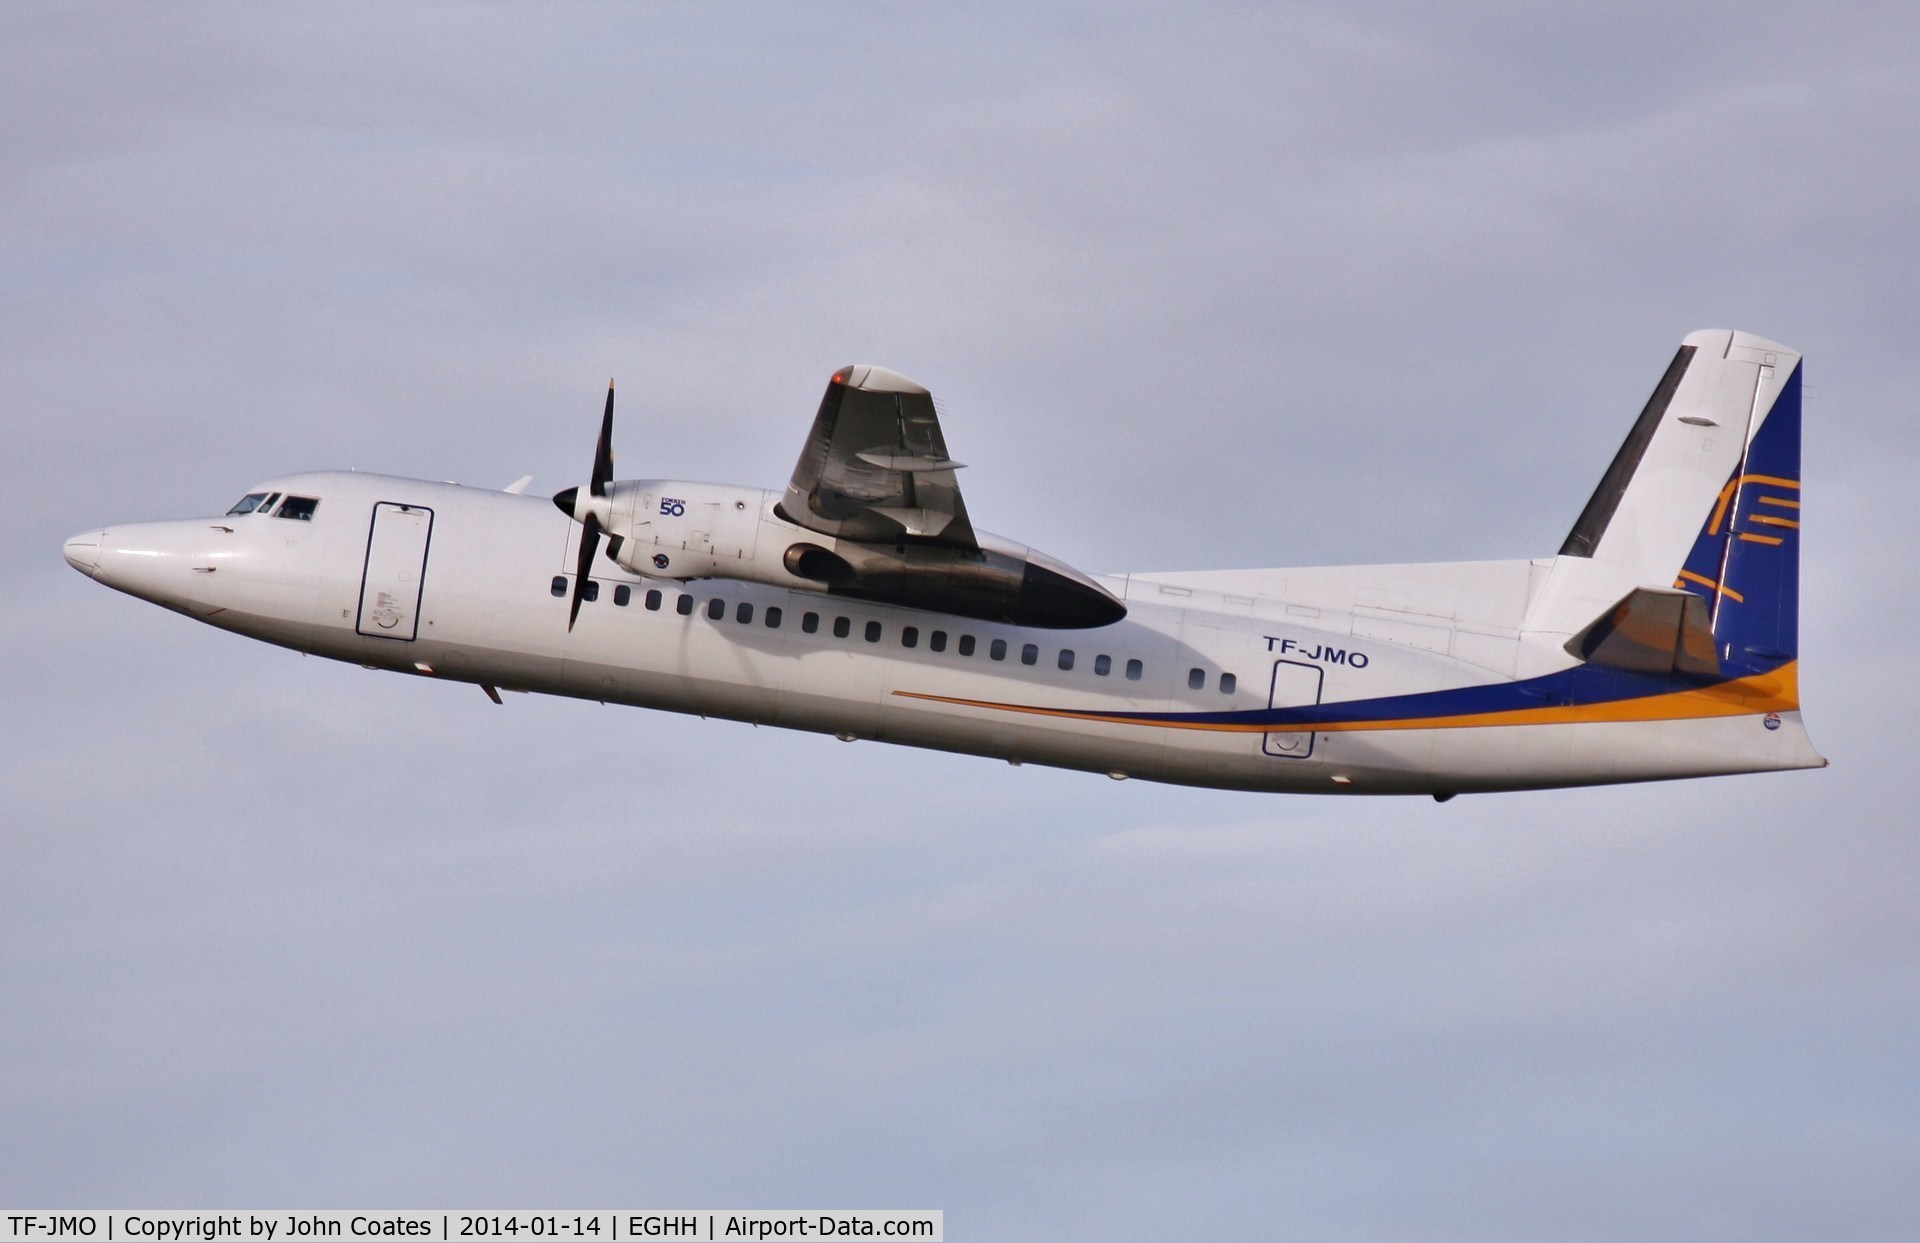 TF-JMO, 1990 Fokker 50 C/N 20205, Continuing trip frm Reykjavik to Casablanca and a new lease.